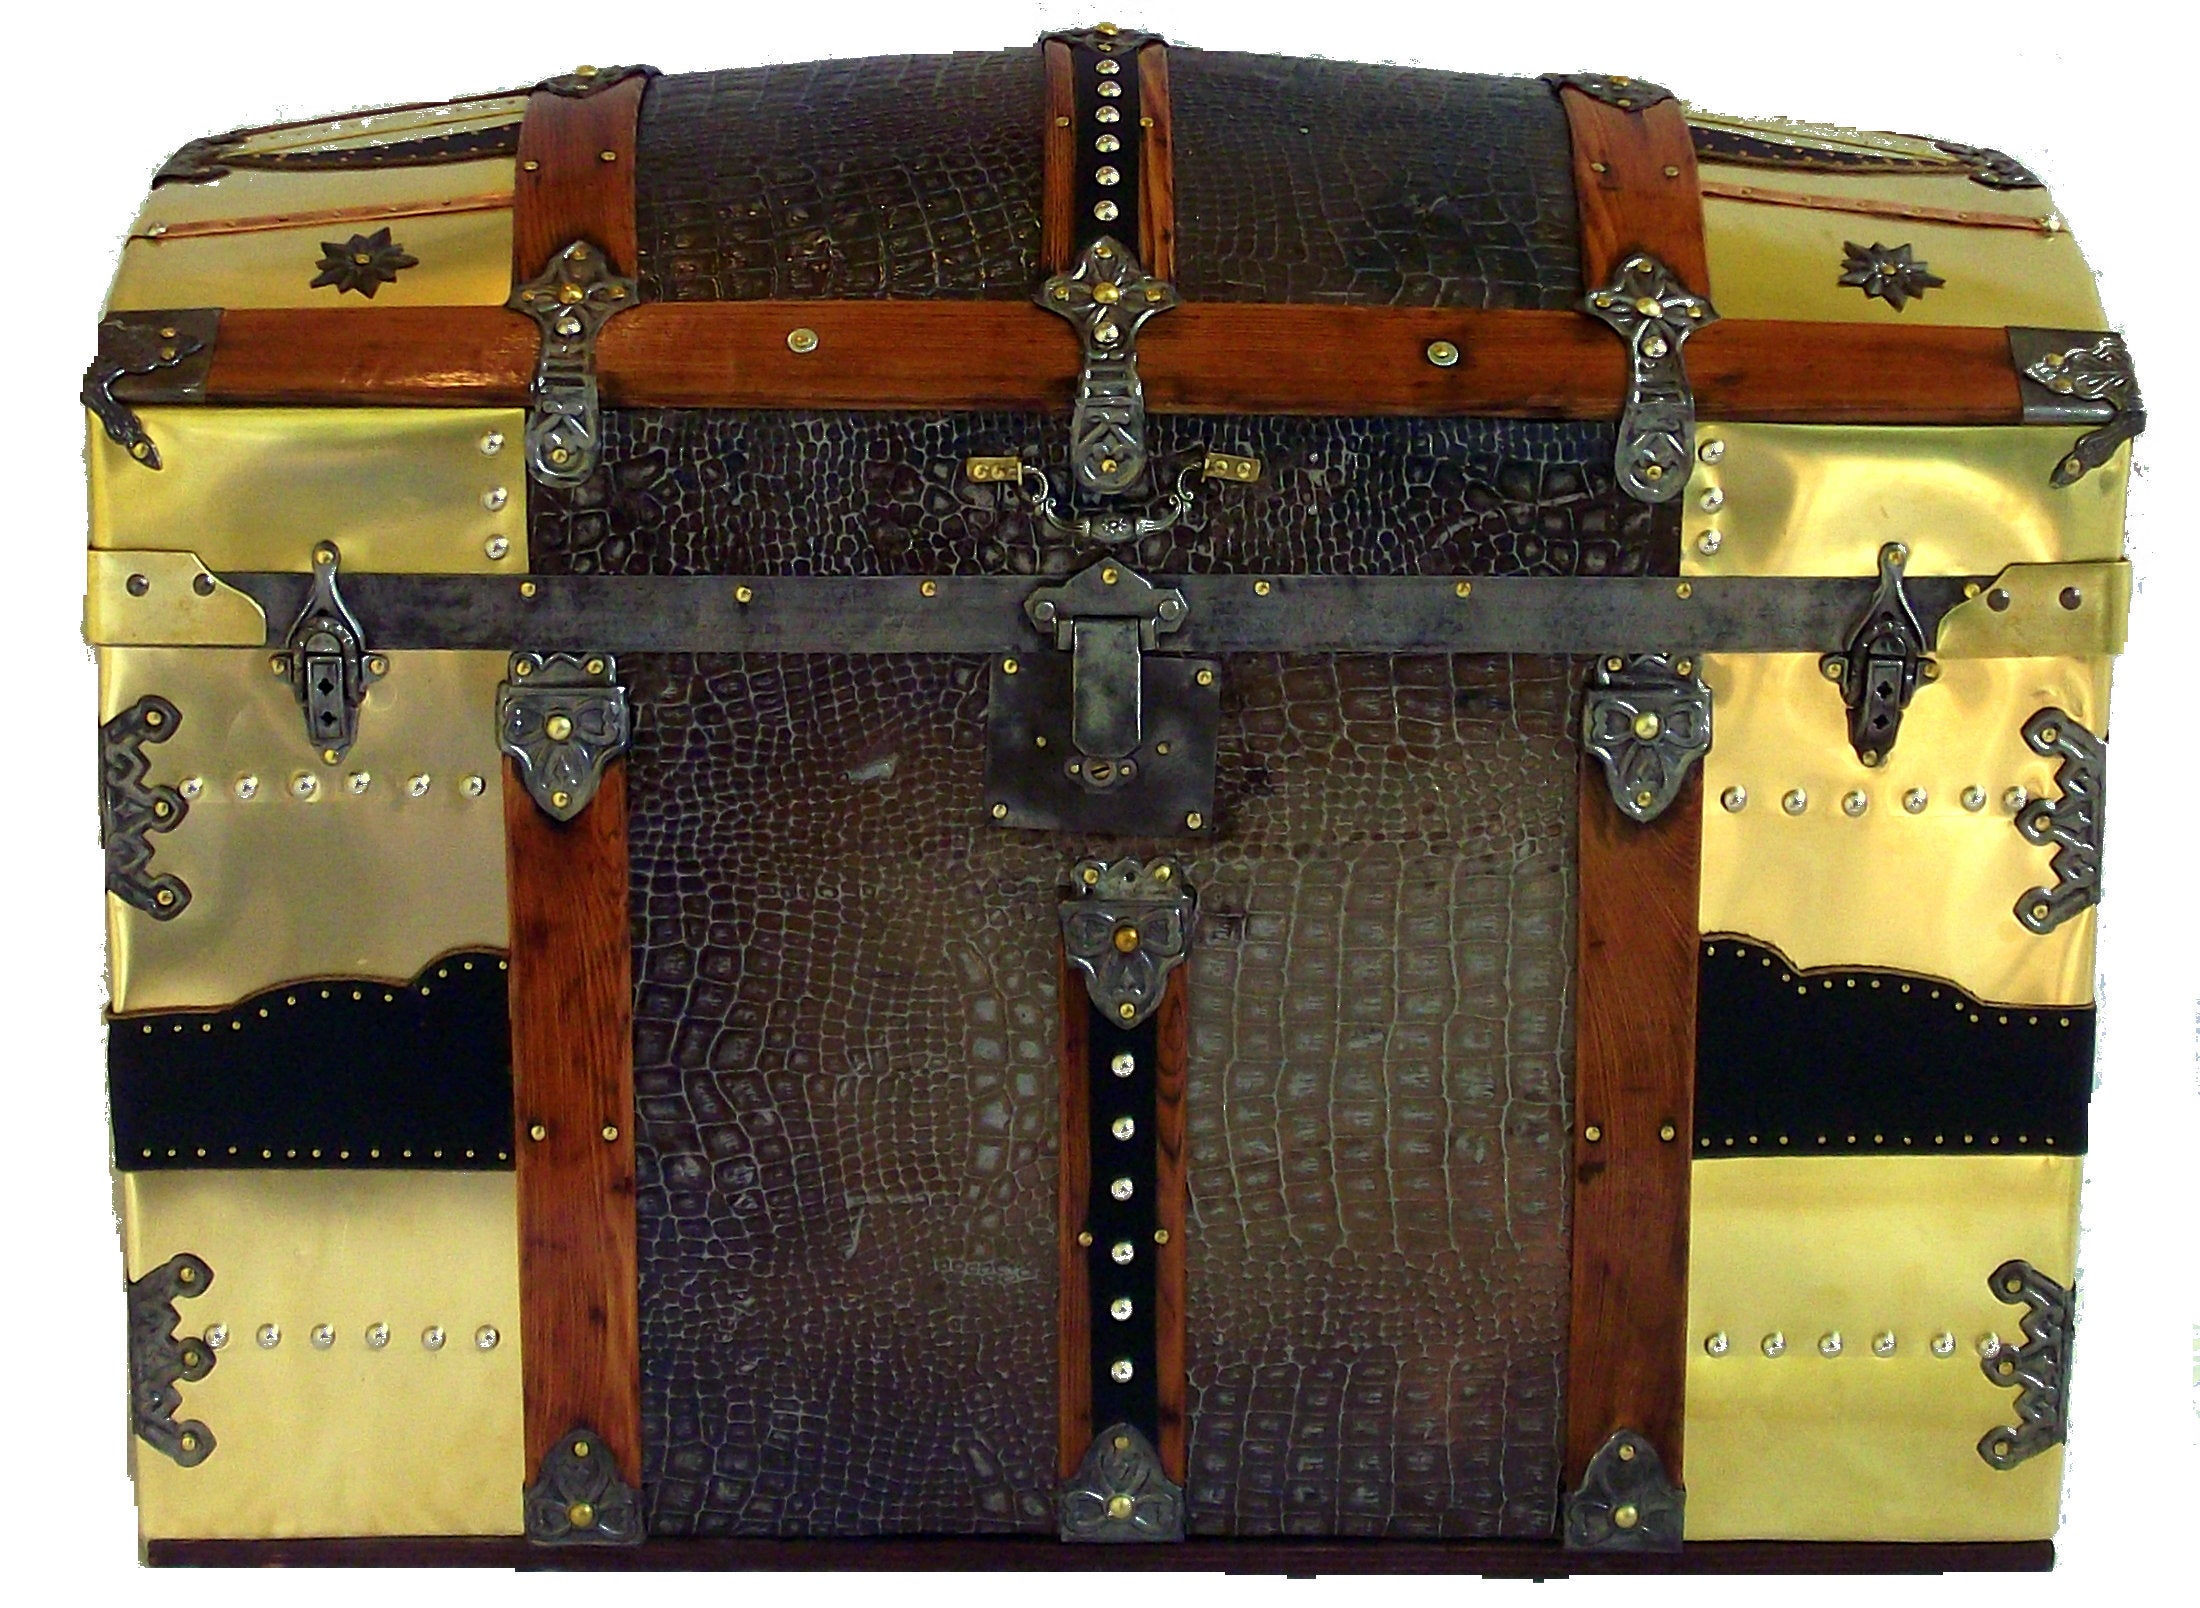 Leather and Brass Camel Back Antique Trunk